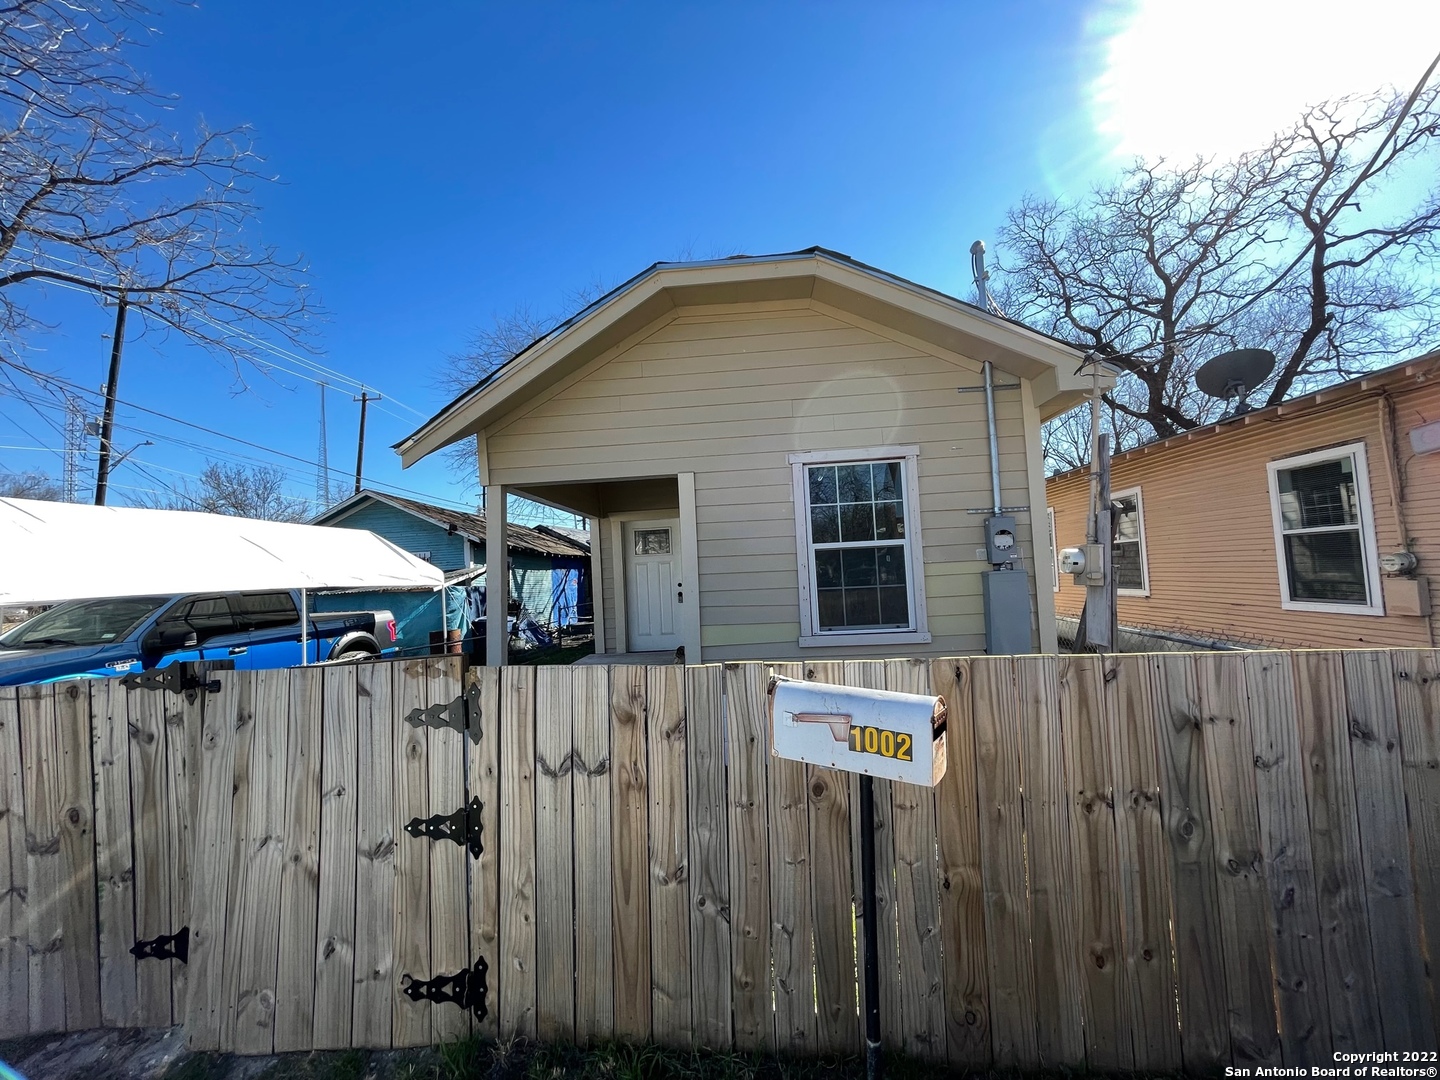 Renovated 2 bedroom/ 1 bath home near downtown/ UTSA - DT Campus! New water heater, new flooring and updated kitchen area! Live close to all that happens downtown - minutes from Market Square and the new San Pedro Creek Culture Park! Call the world known River Walk your neighbor and enjoy all the shows the world class Guadalupe Cultural Arts Center! And with VIA Centro Plaza just blocks away, the city is your playground! So many options, and all within walking distance! Make this your new HOME today!